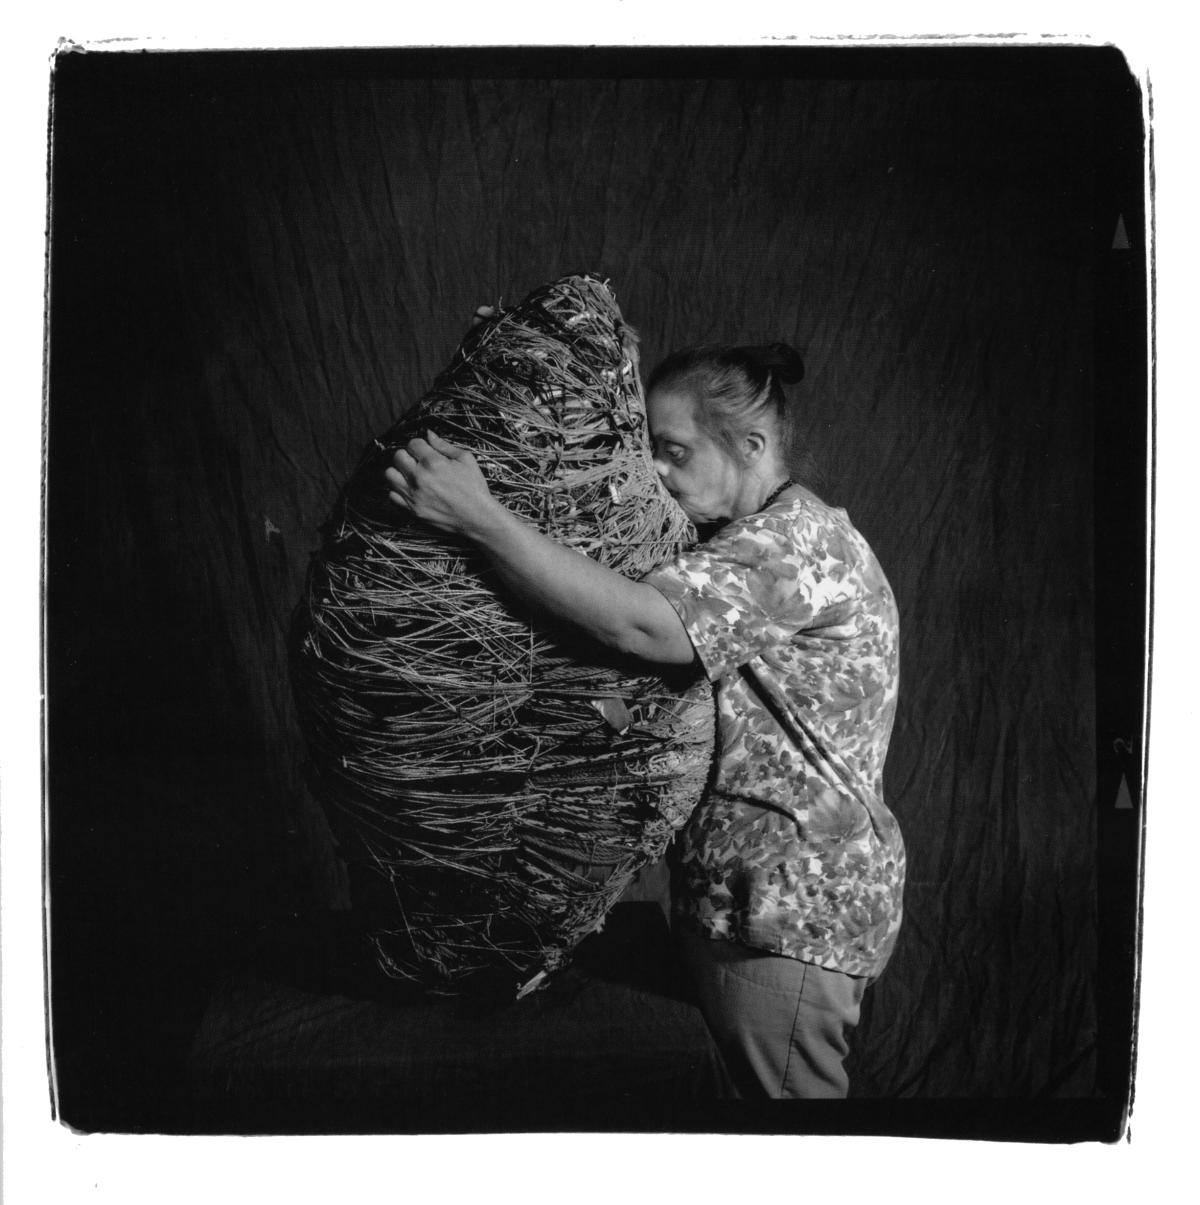 Judith Scott embracing one of her large sculptures